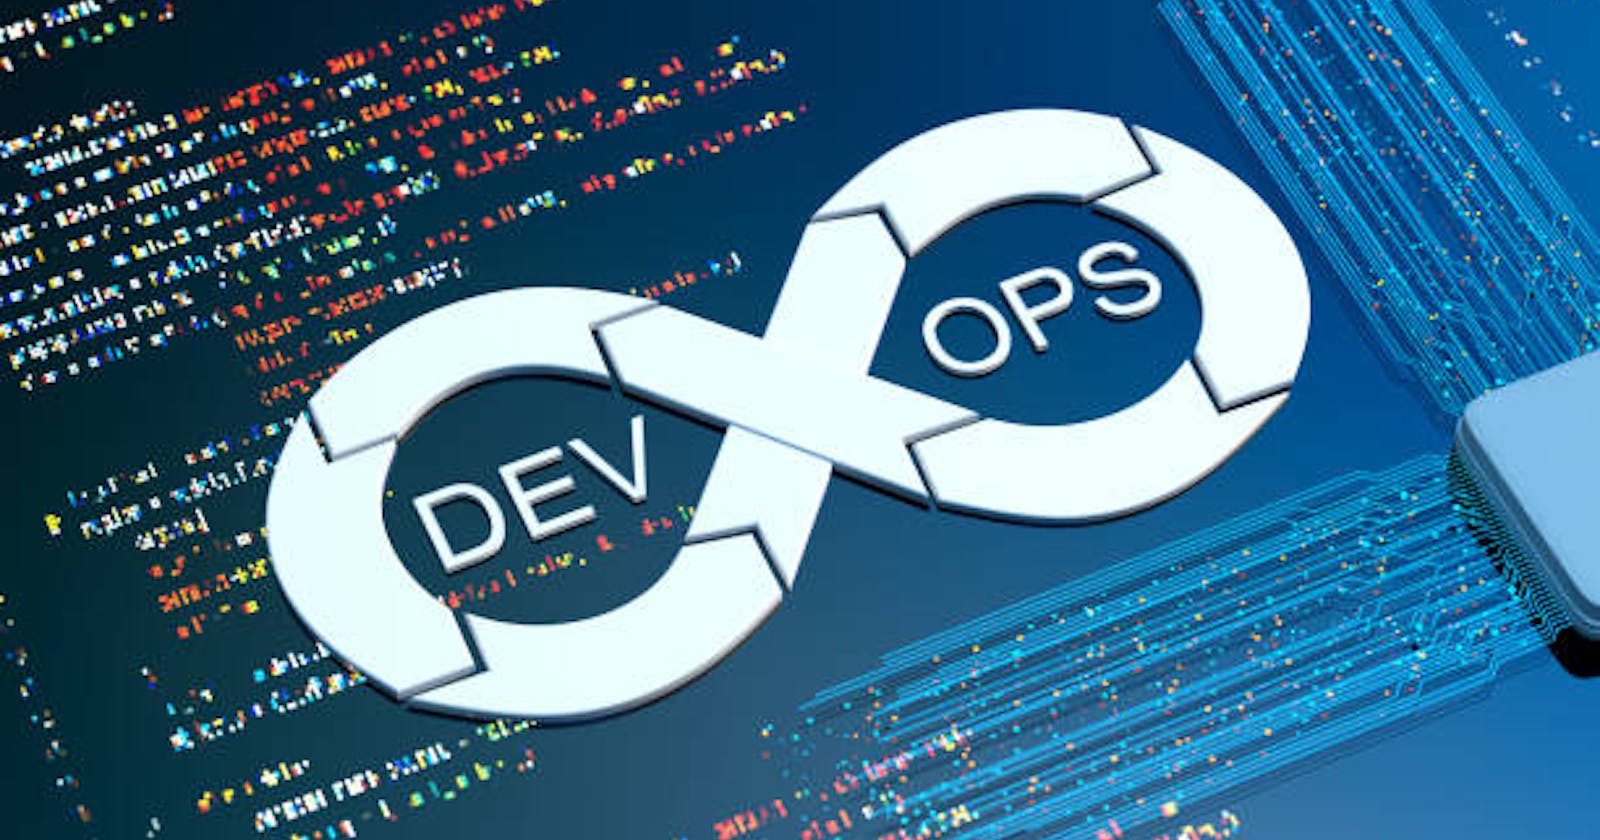 Day 1 Introduction To DevOps